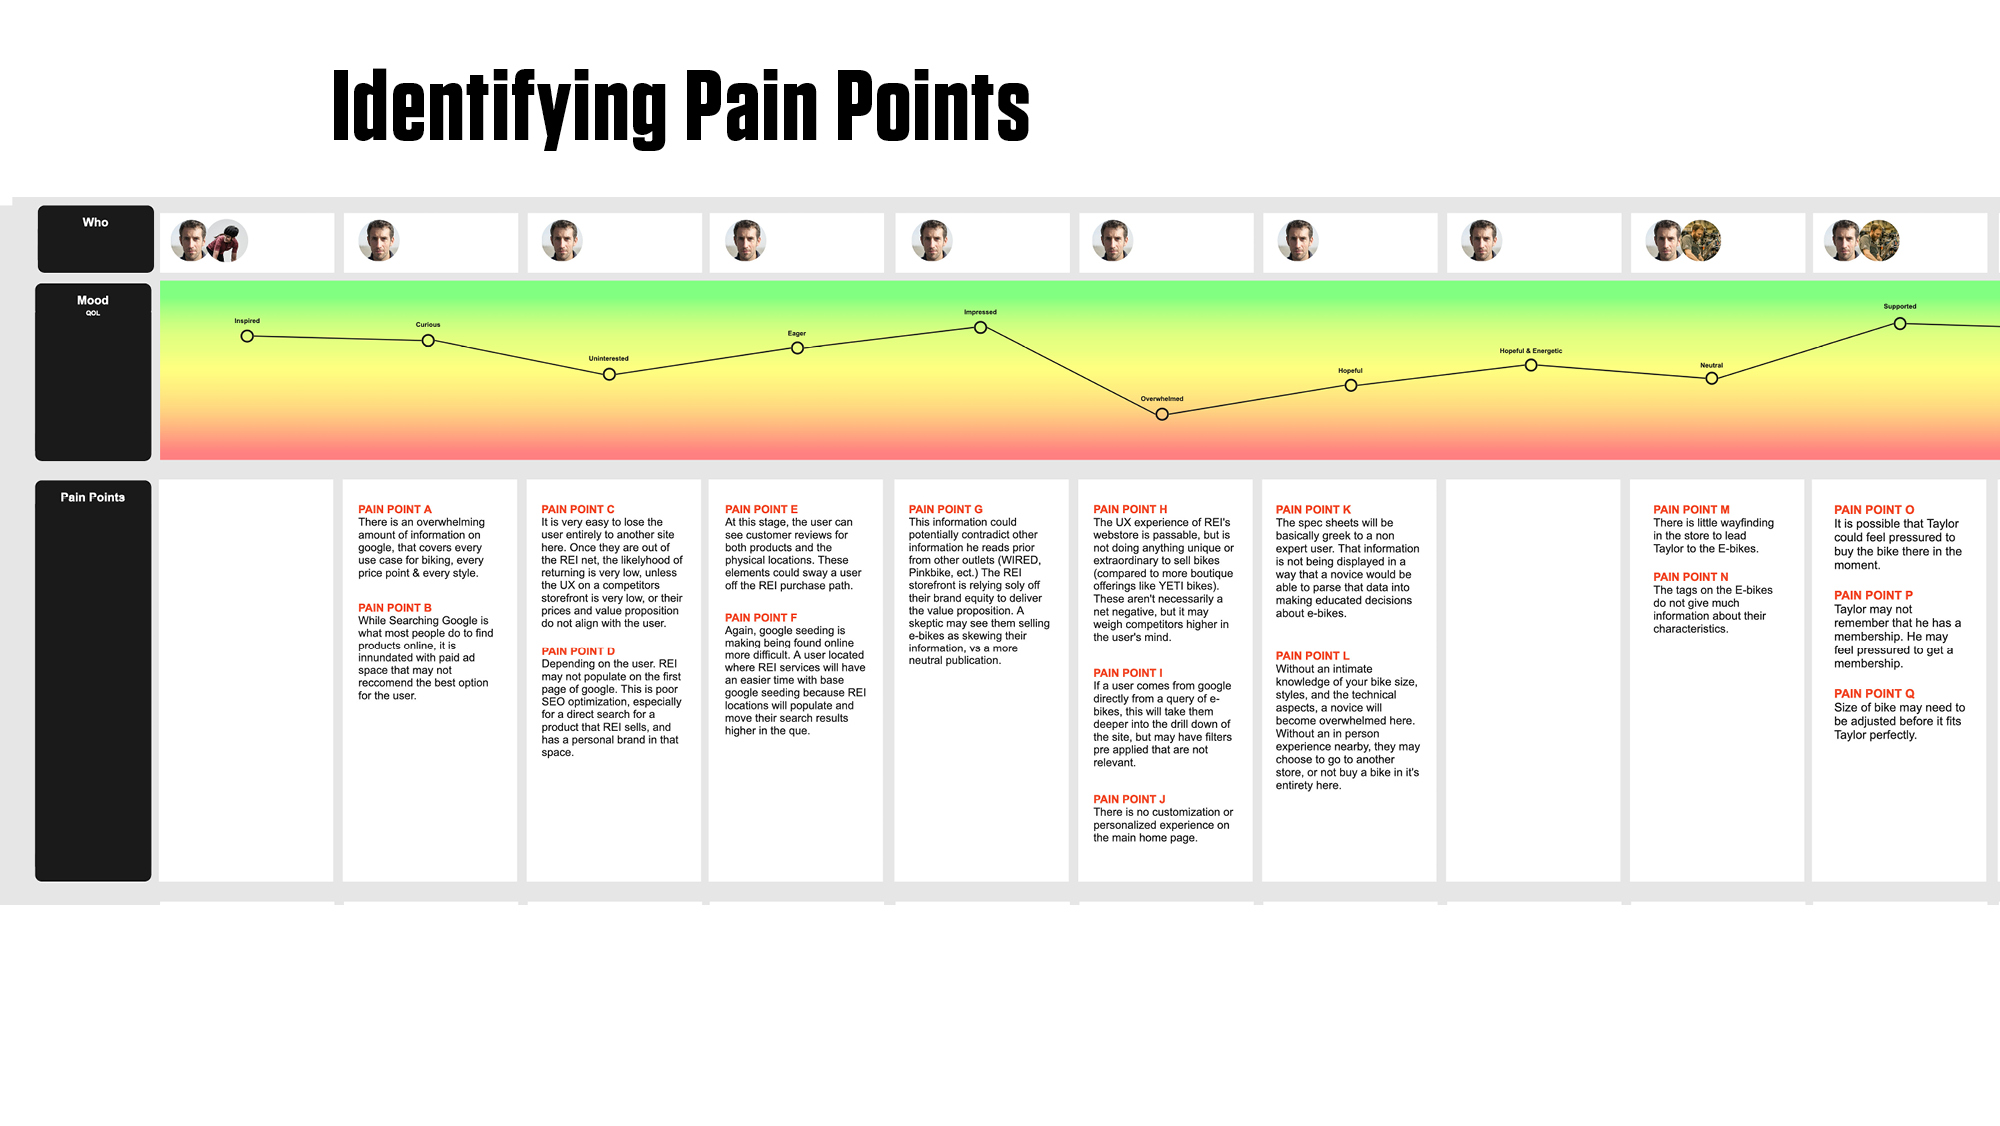 A diagram of user pain points. This exemplifies the kind of pain points the students gathered for the project